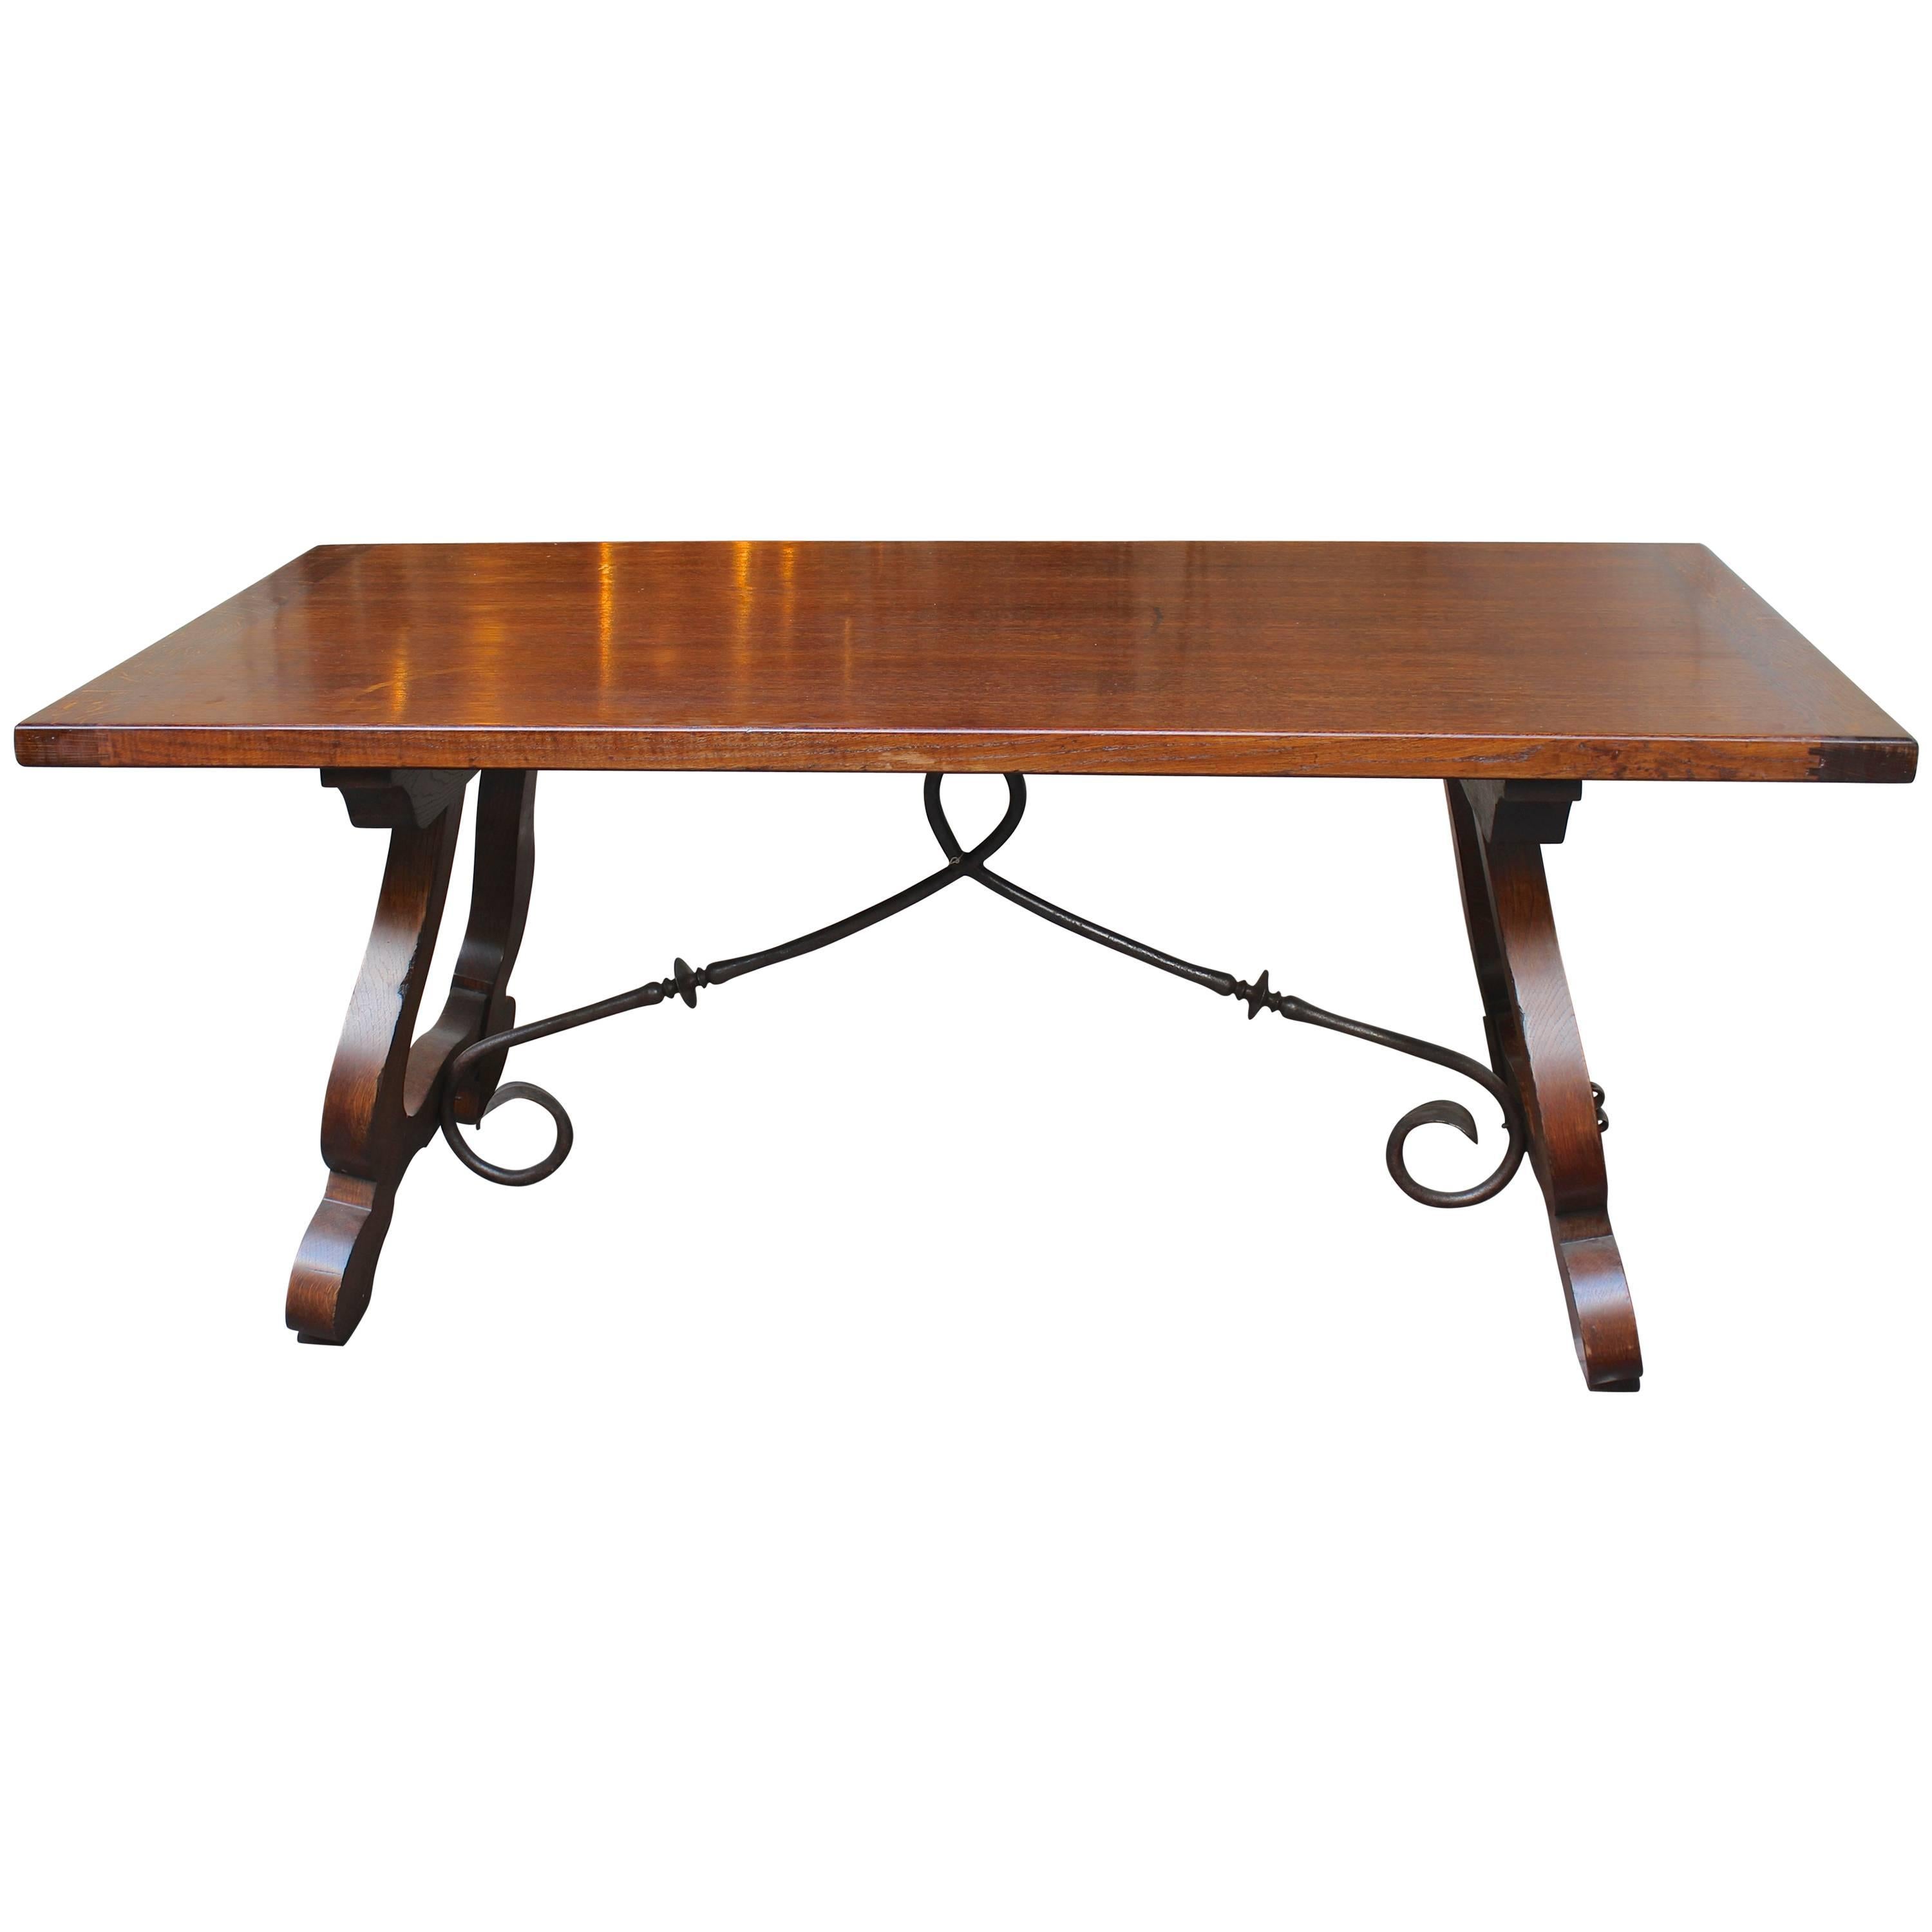 Antique French Gentlemen's Table from San Tropez with Original Ironwork